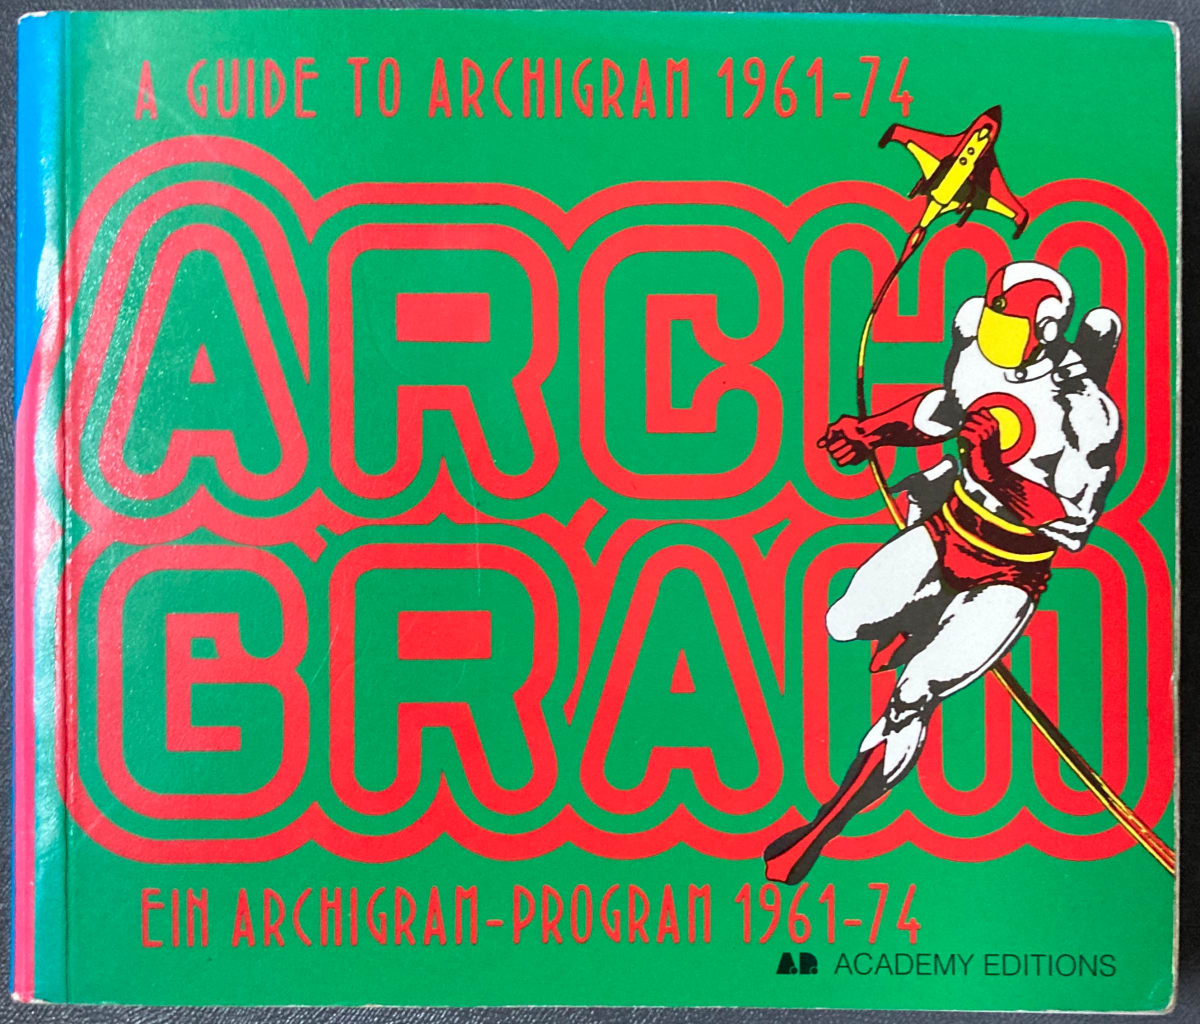 A Guide to Archigram 1961-74 by Archigram 